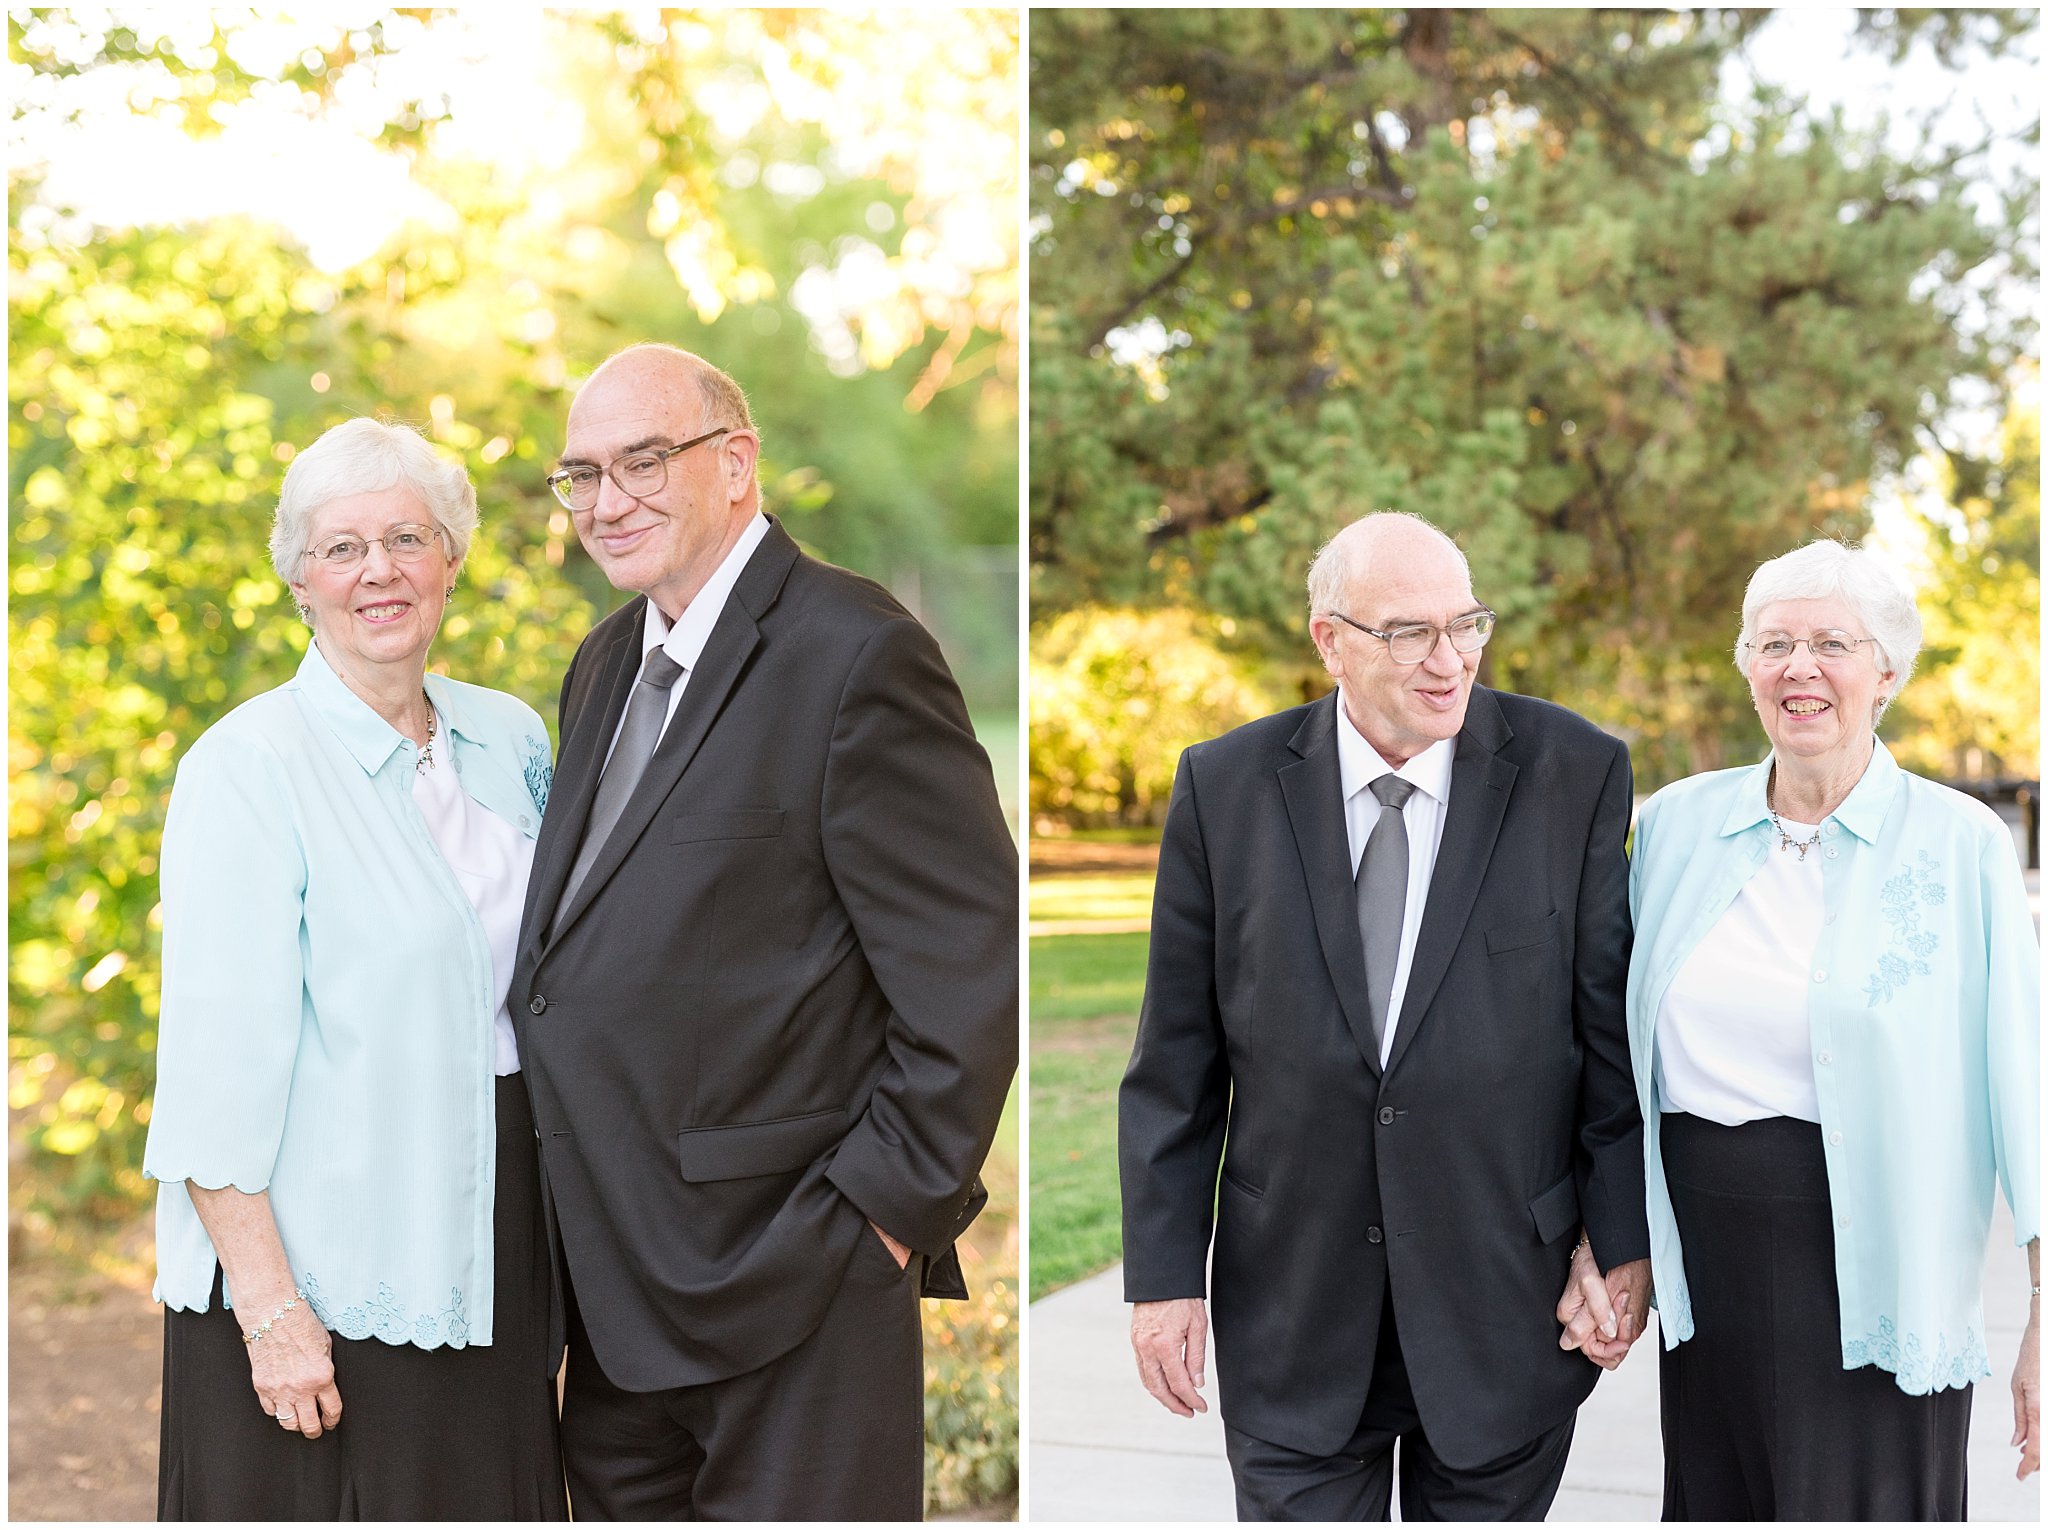 Older couple smiling and walking | Layton Commons Park | Layton Couples Photographer | Jessie and Dallin